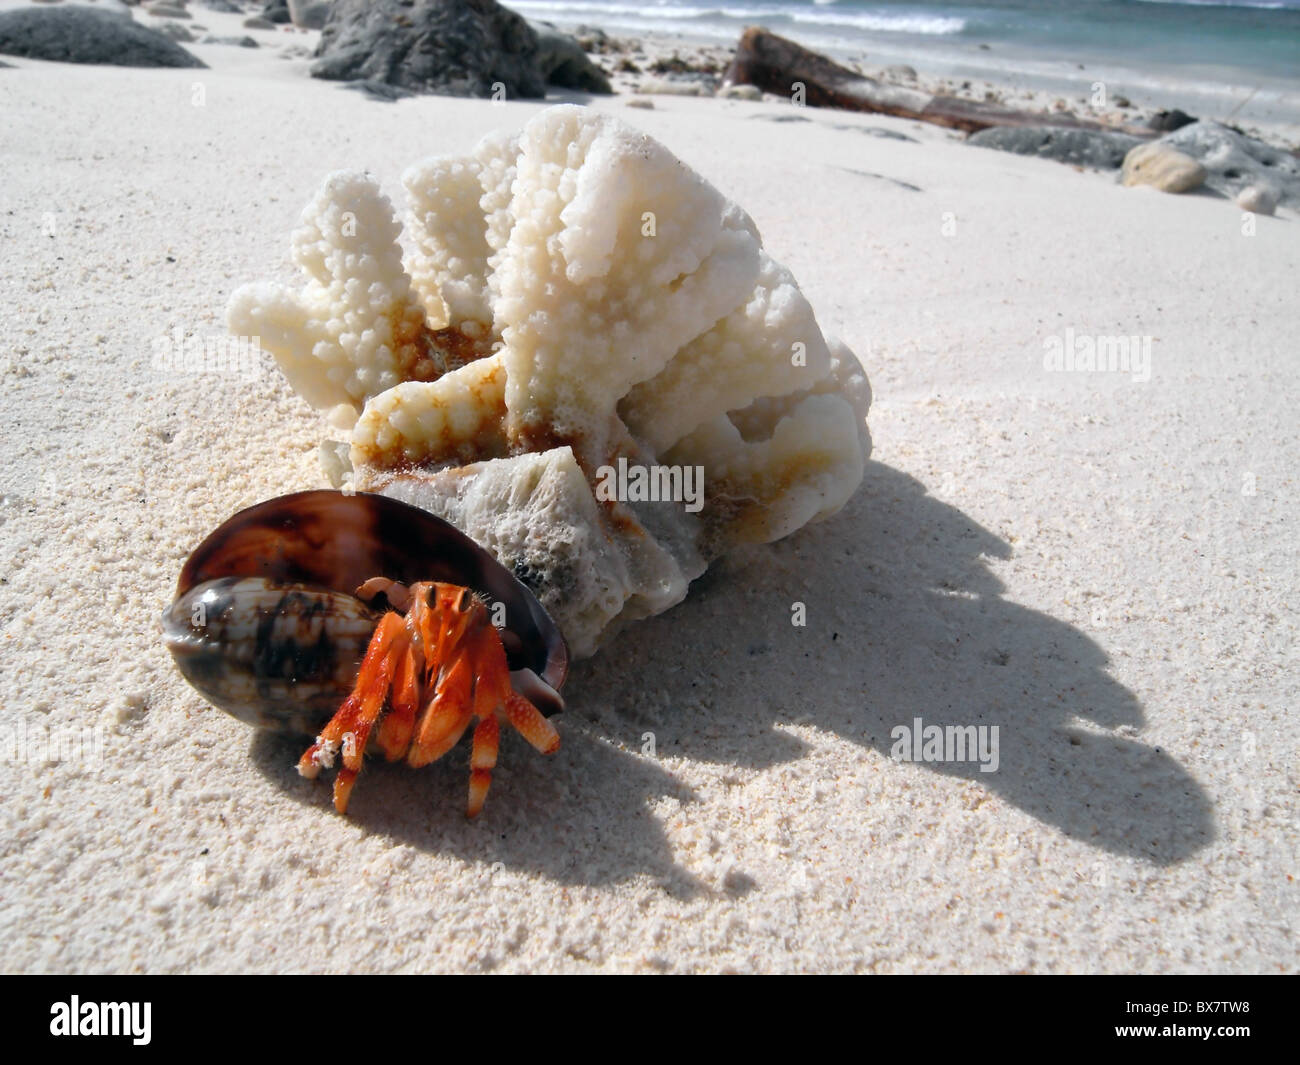 Hermit crab (Coenobita sp.) in transitional stage juvenile cowry shell, West island, Cocos Keeling, Indian Ocean Stock Photo